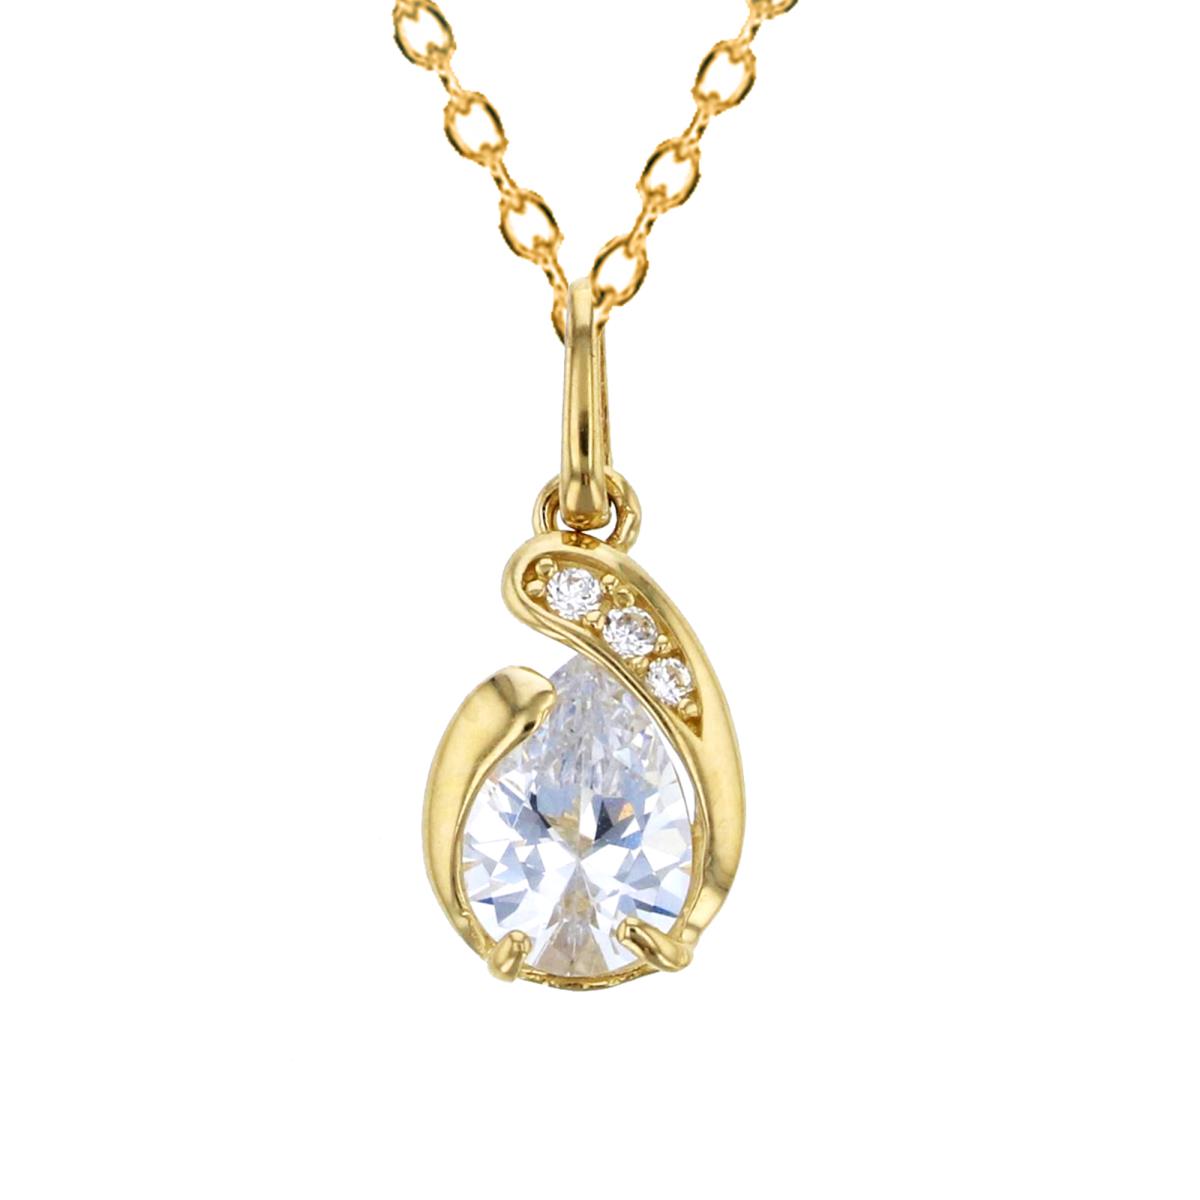 10K Yellow Gold 7x5mm Pear Cut CZ Dangling 18" Necklace